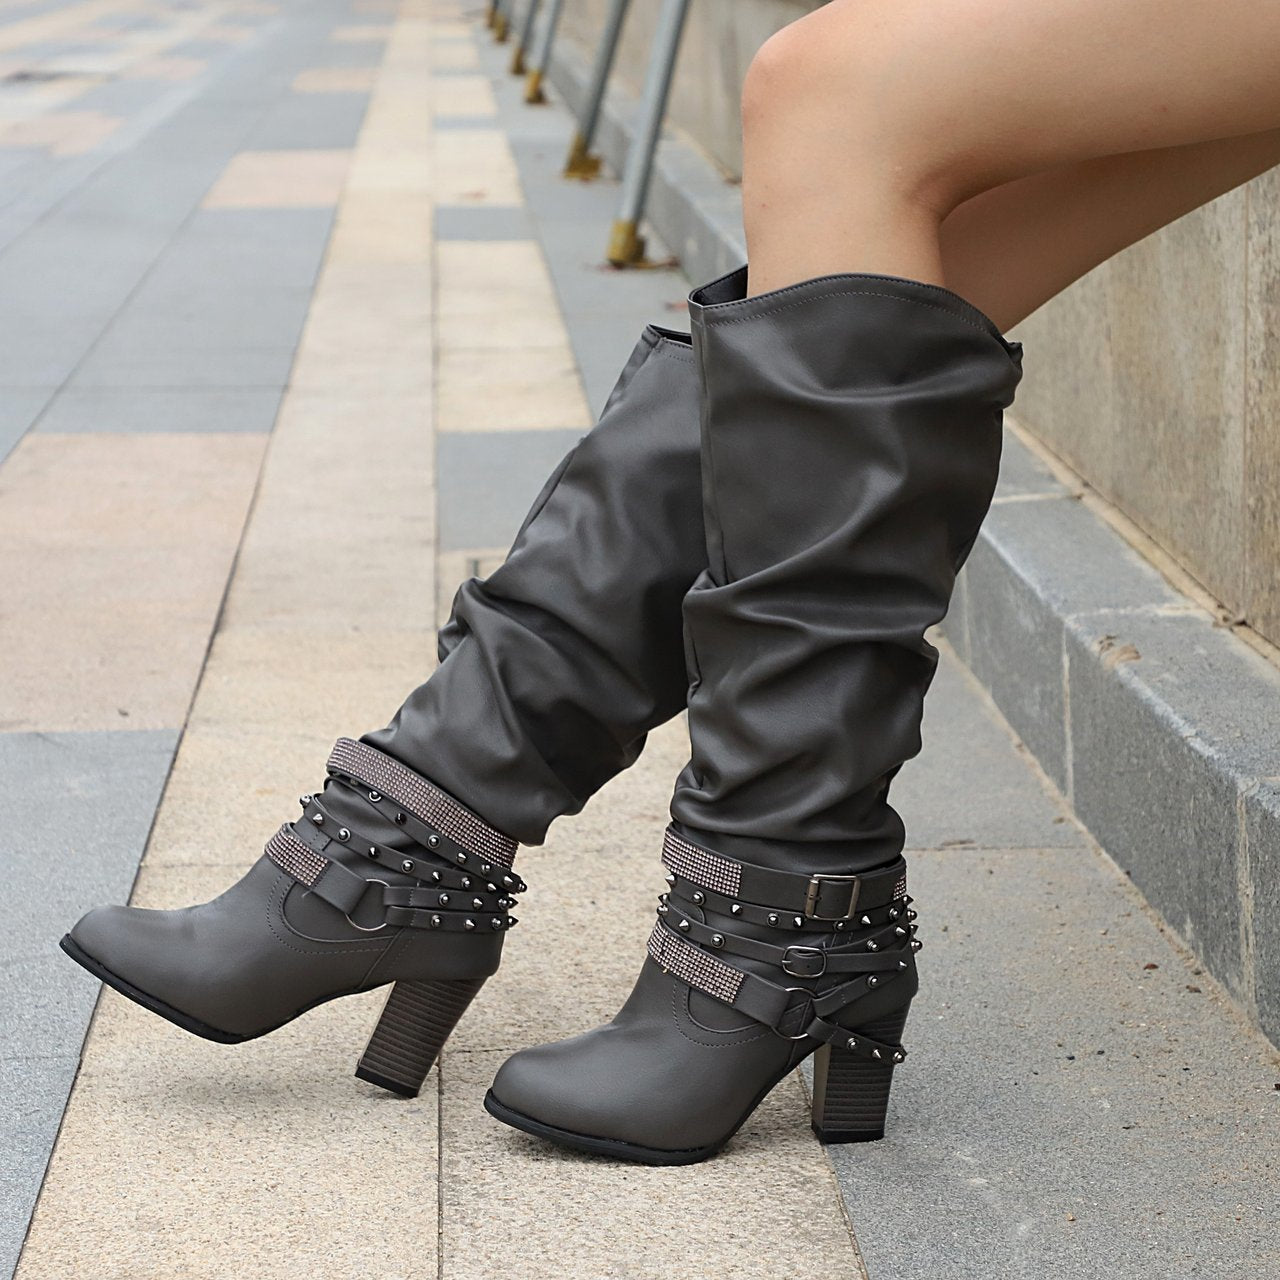 High heeled and high heeled Knight boots